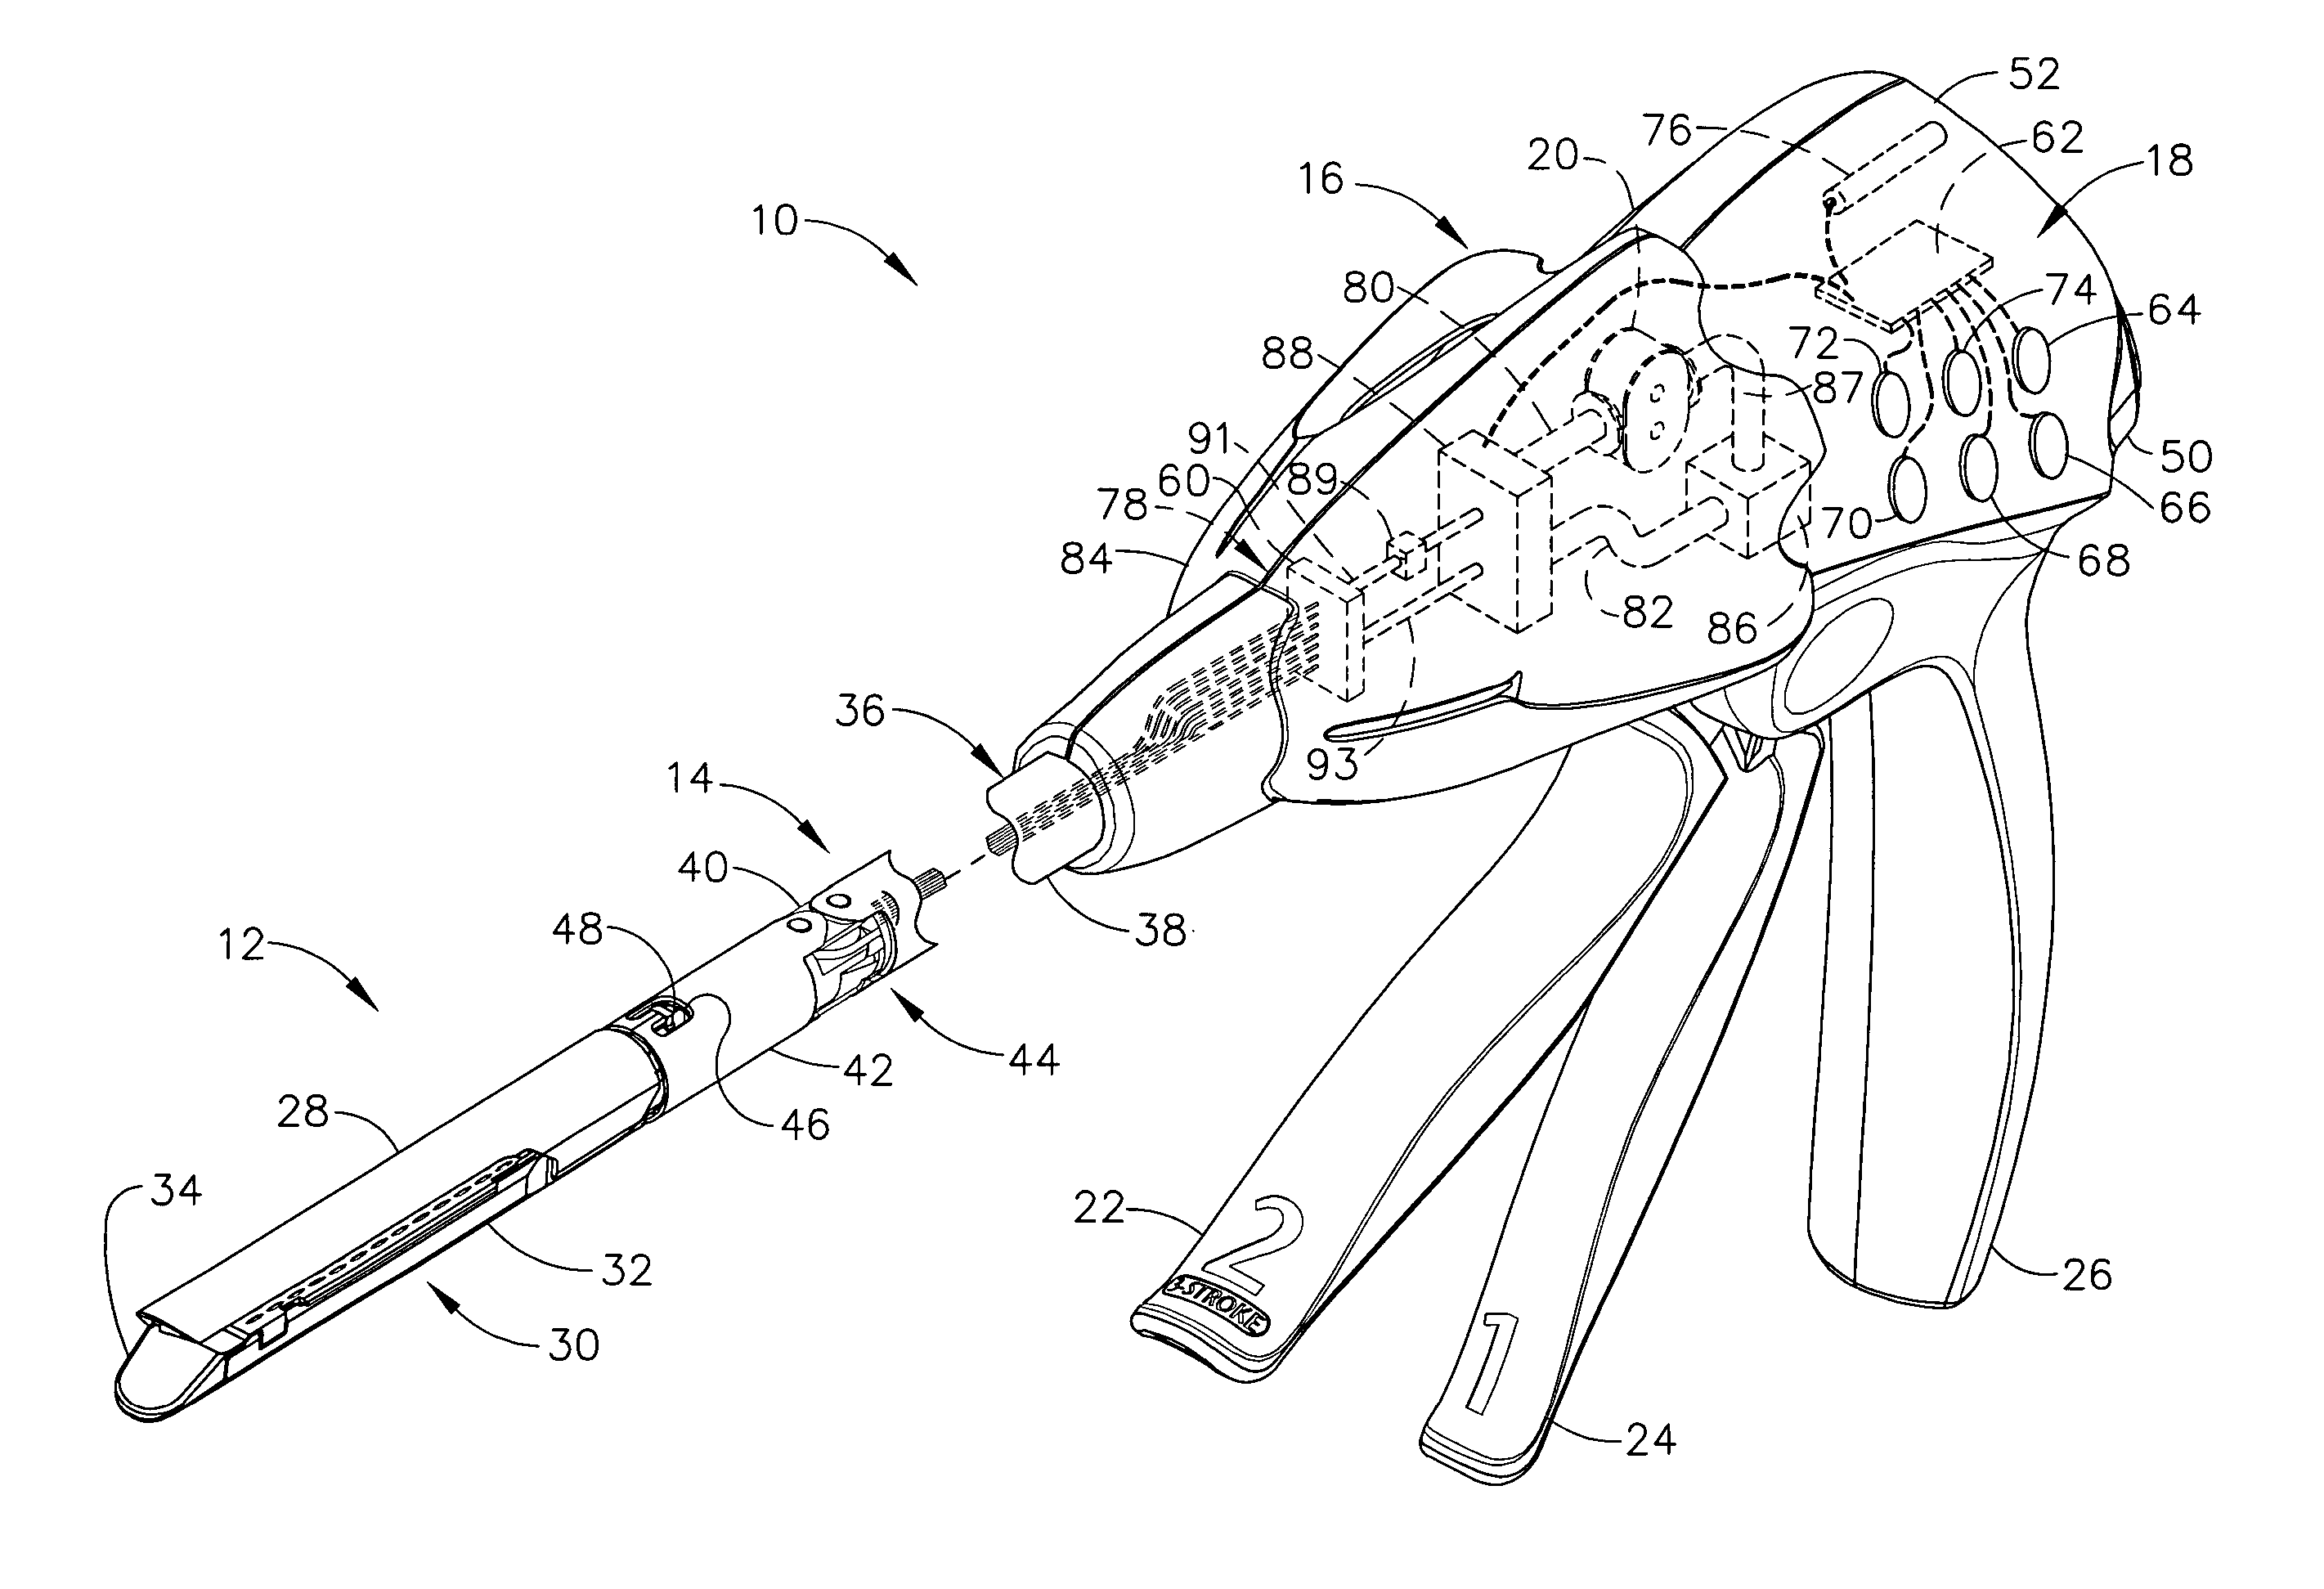 Rotary hydraulic pump actuated multi-stroke surgical instrument